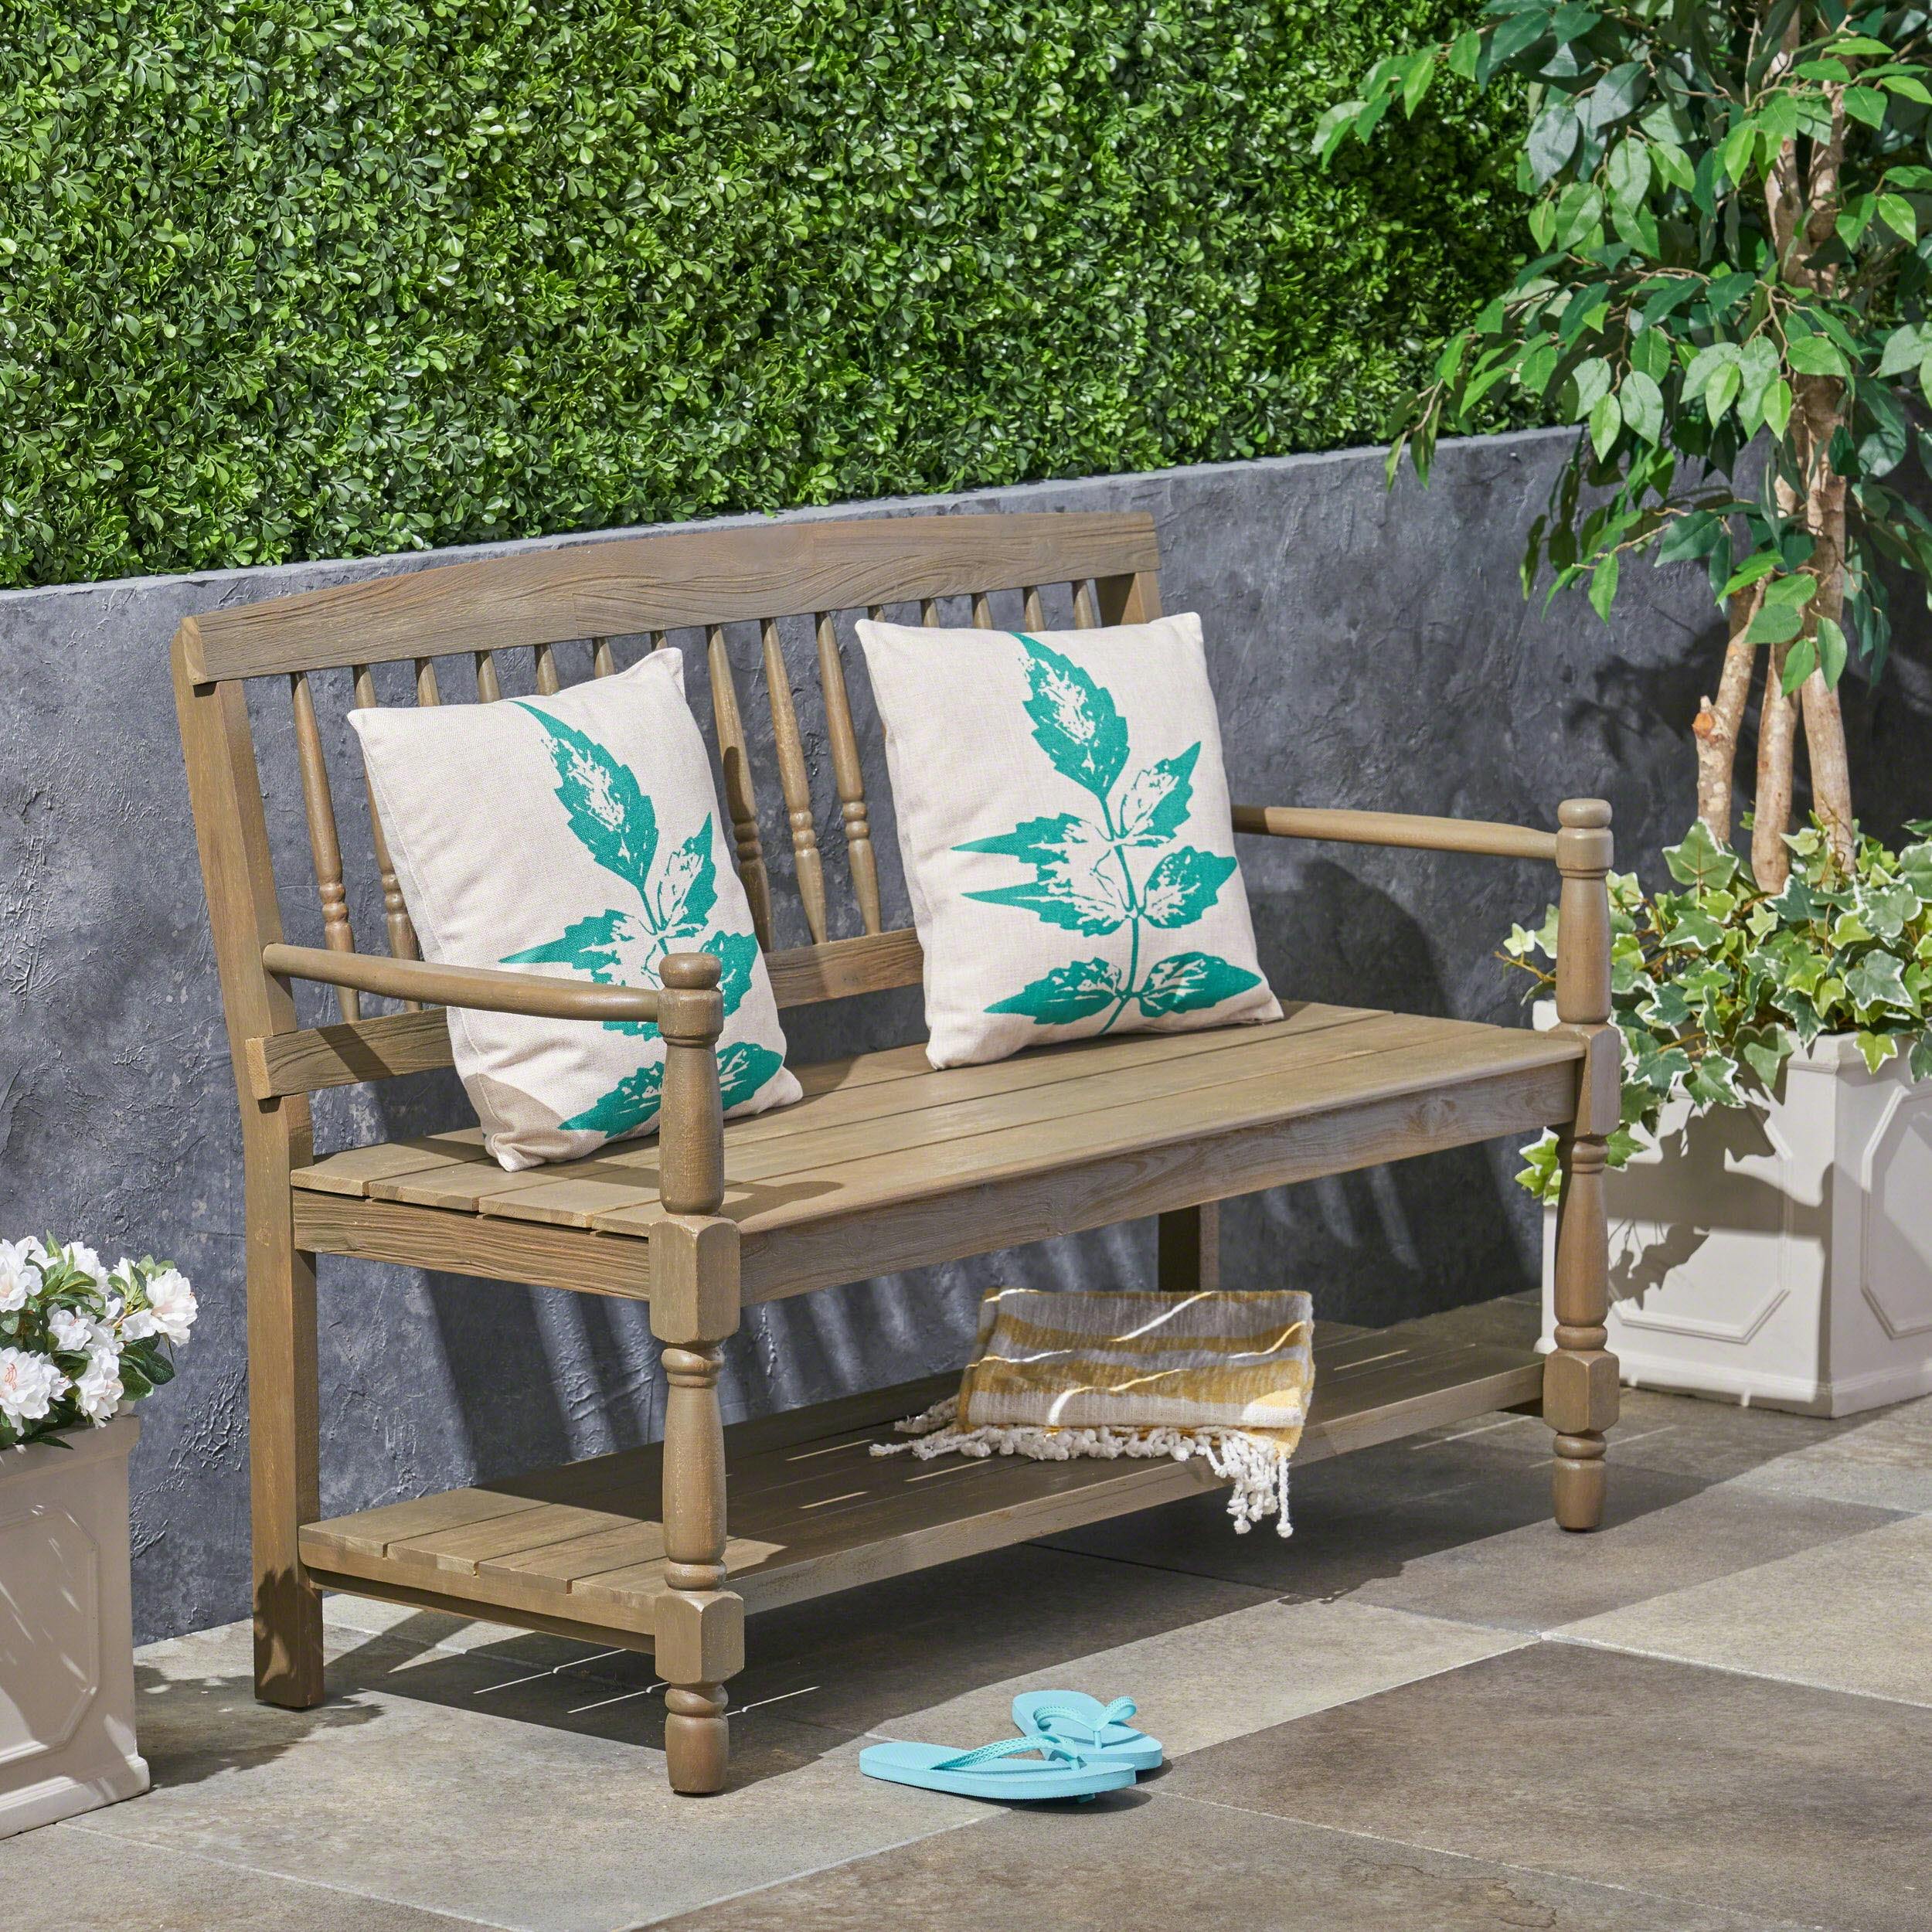 Larry Outdoor Rustic Acacia Wood Bench with Shelf, Gray